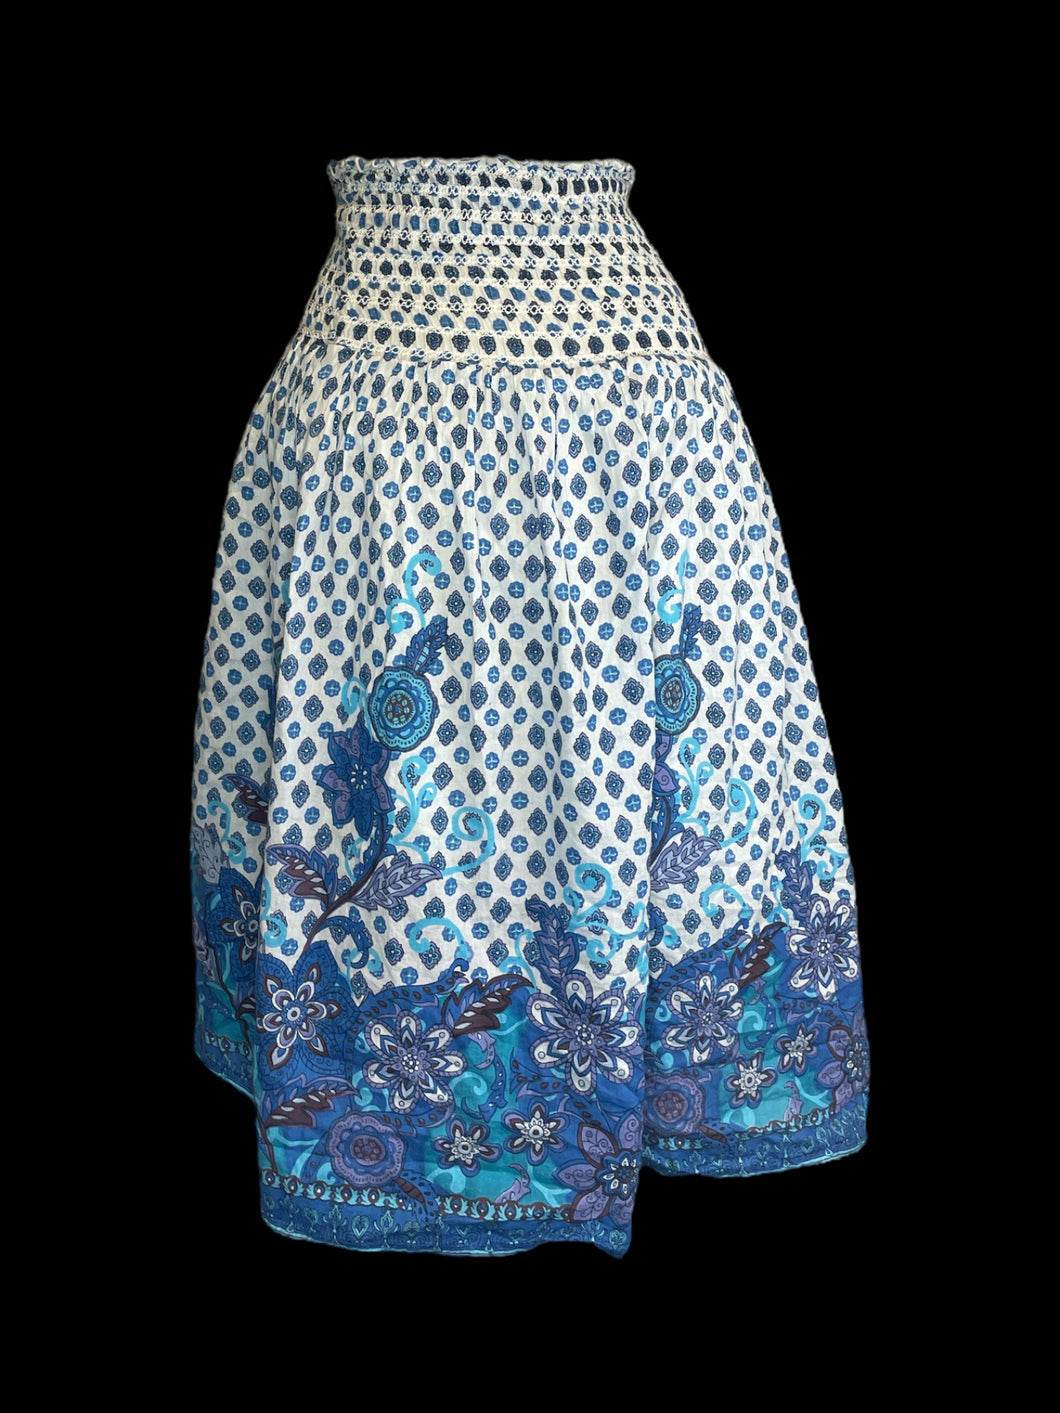 S Vintage 70s Blue & white strapless dress w/  geometric floral pattern, & shired chest